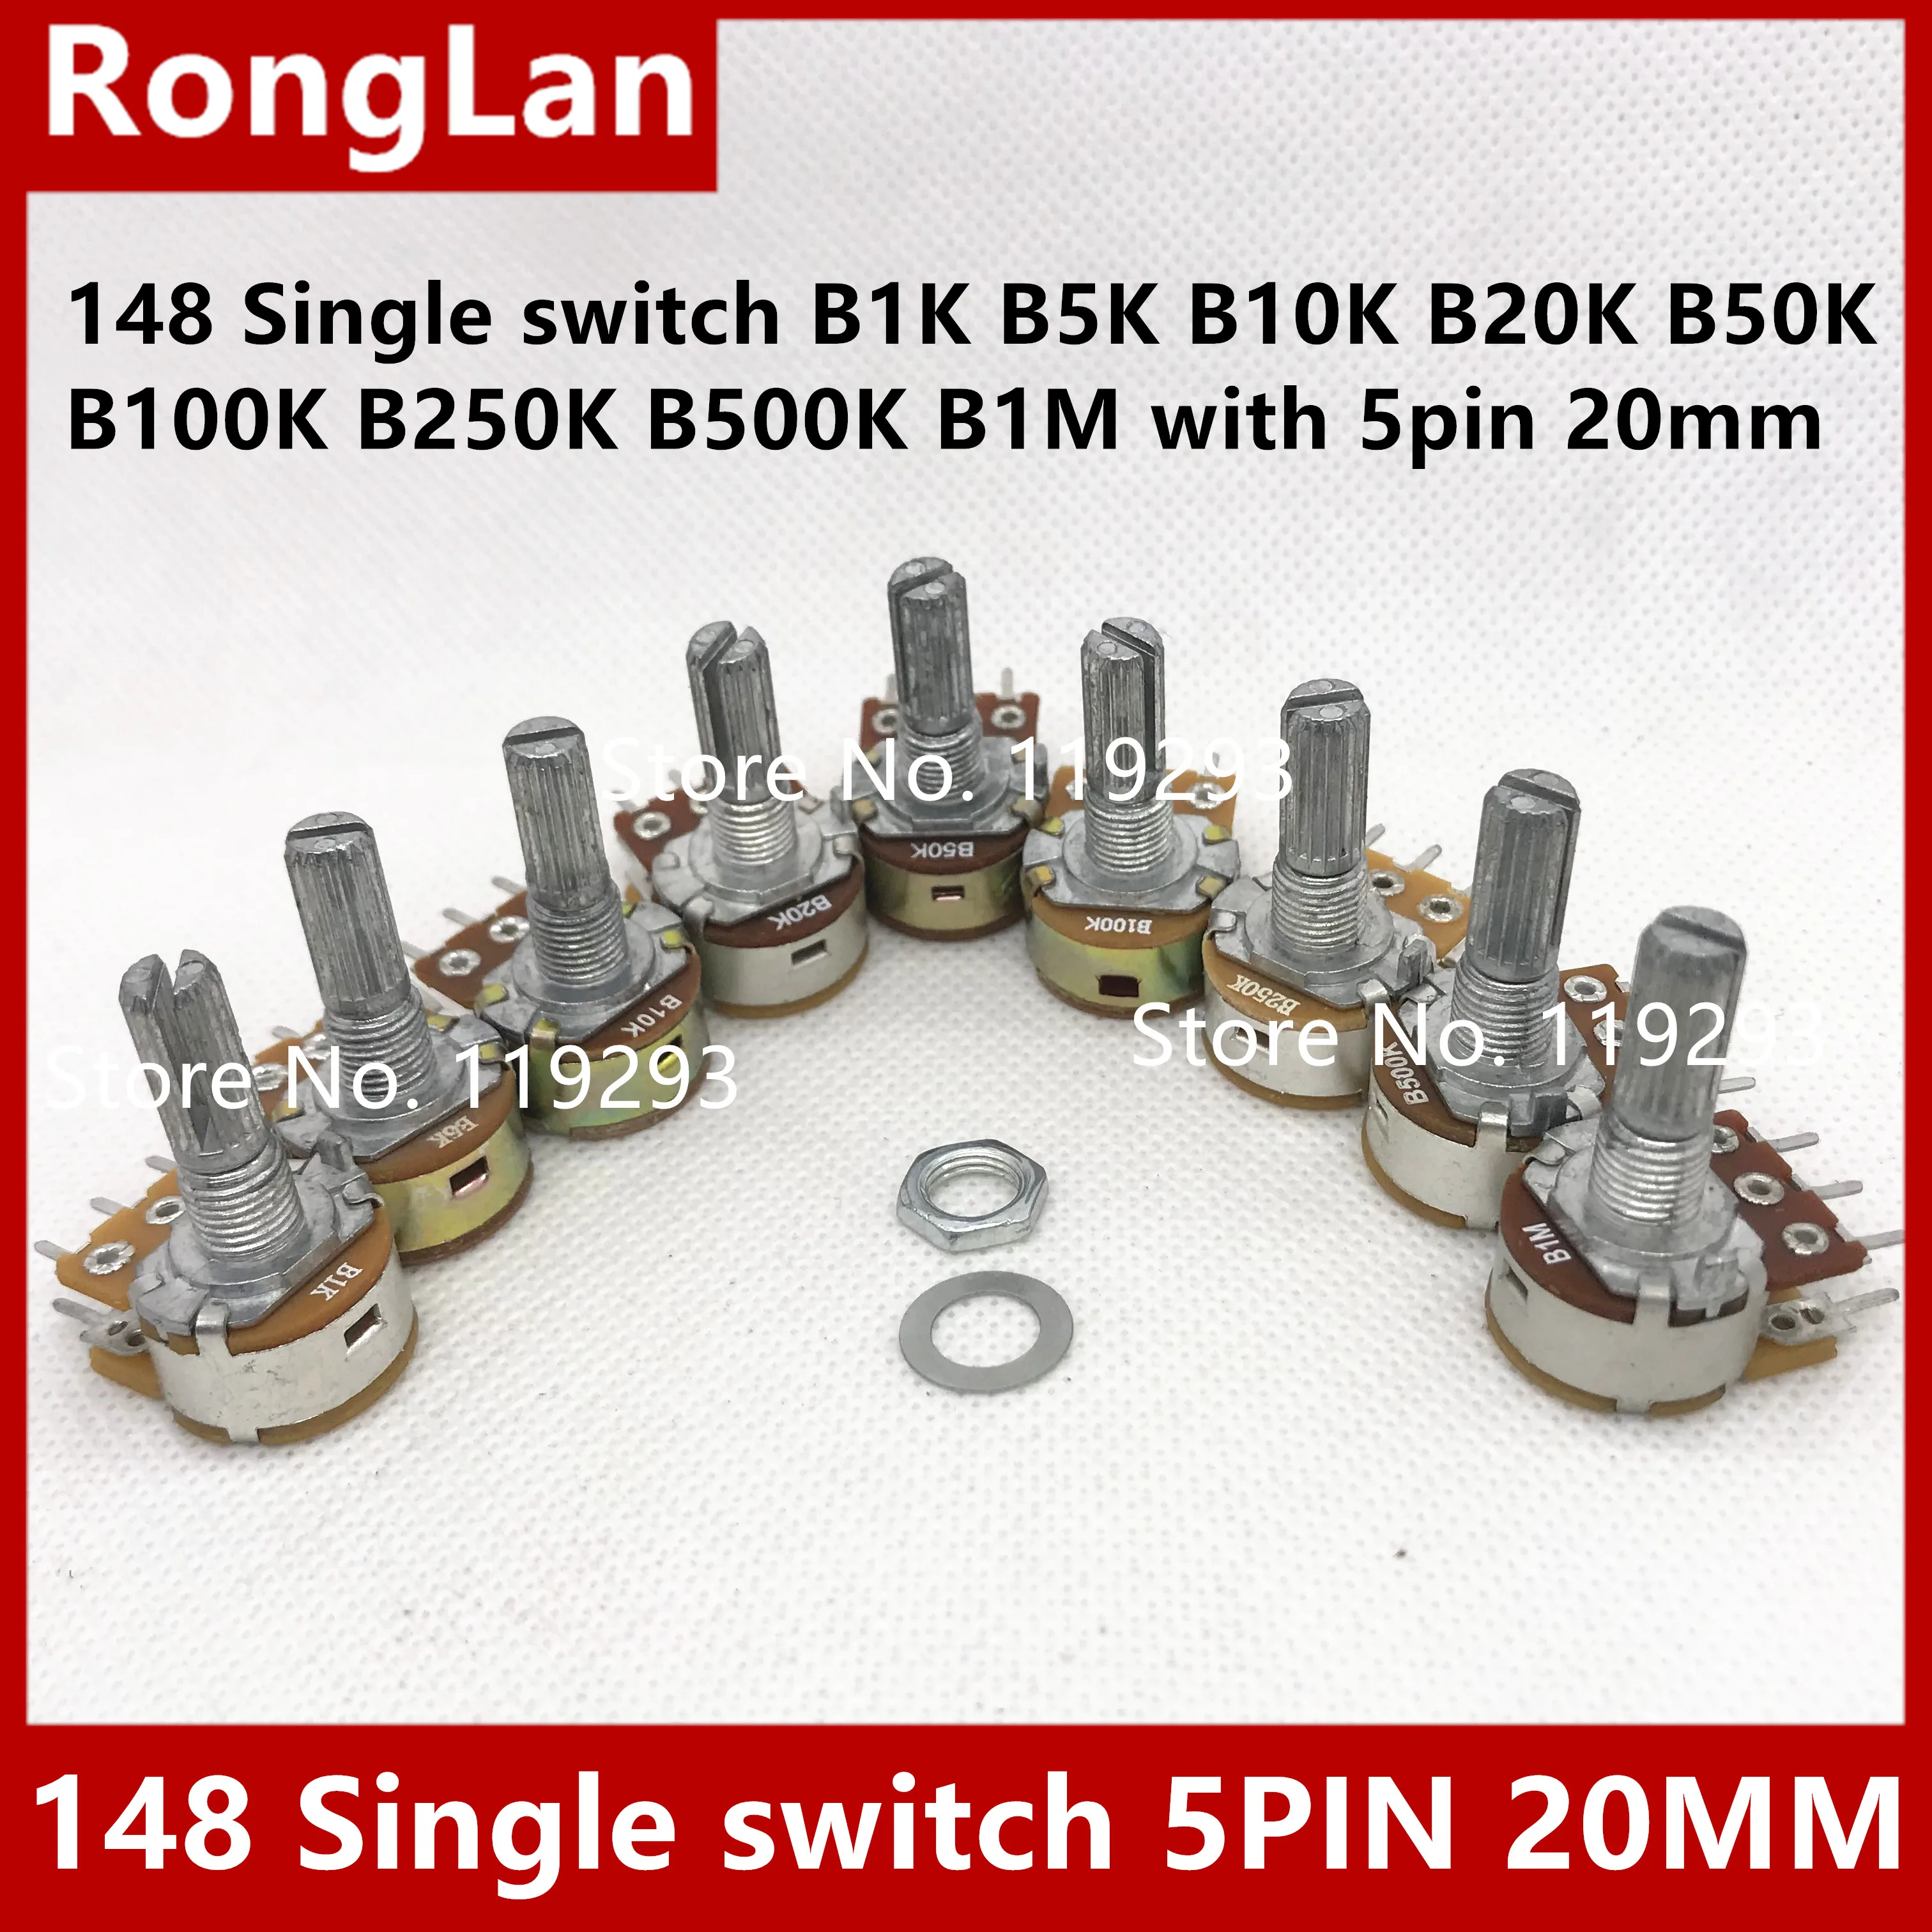 Adjustable resistance potentiometer humidifier 148 Single B1K B5K B10K B20K B50K B100K B250K B500K B1M with switch 5pin 20mm-5pc